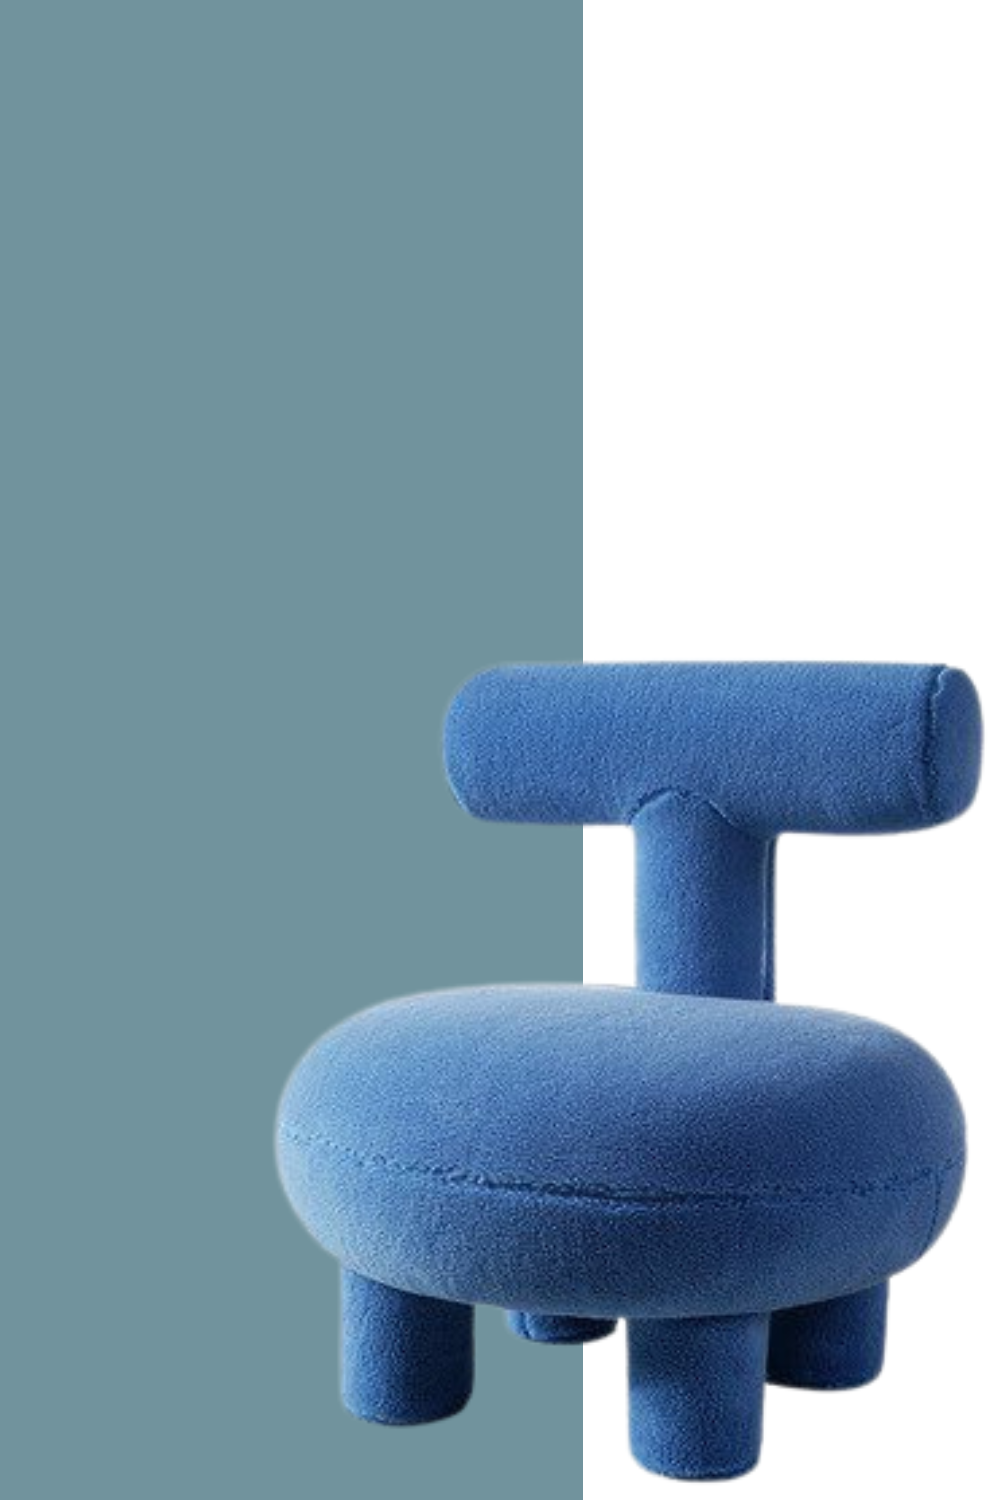 sculptured accent chair in upholstered seat, back and legs blue fabric